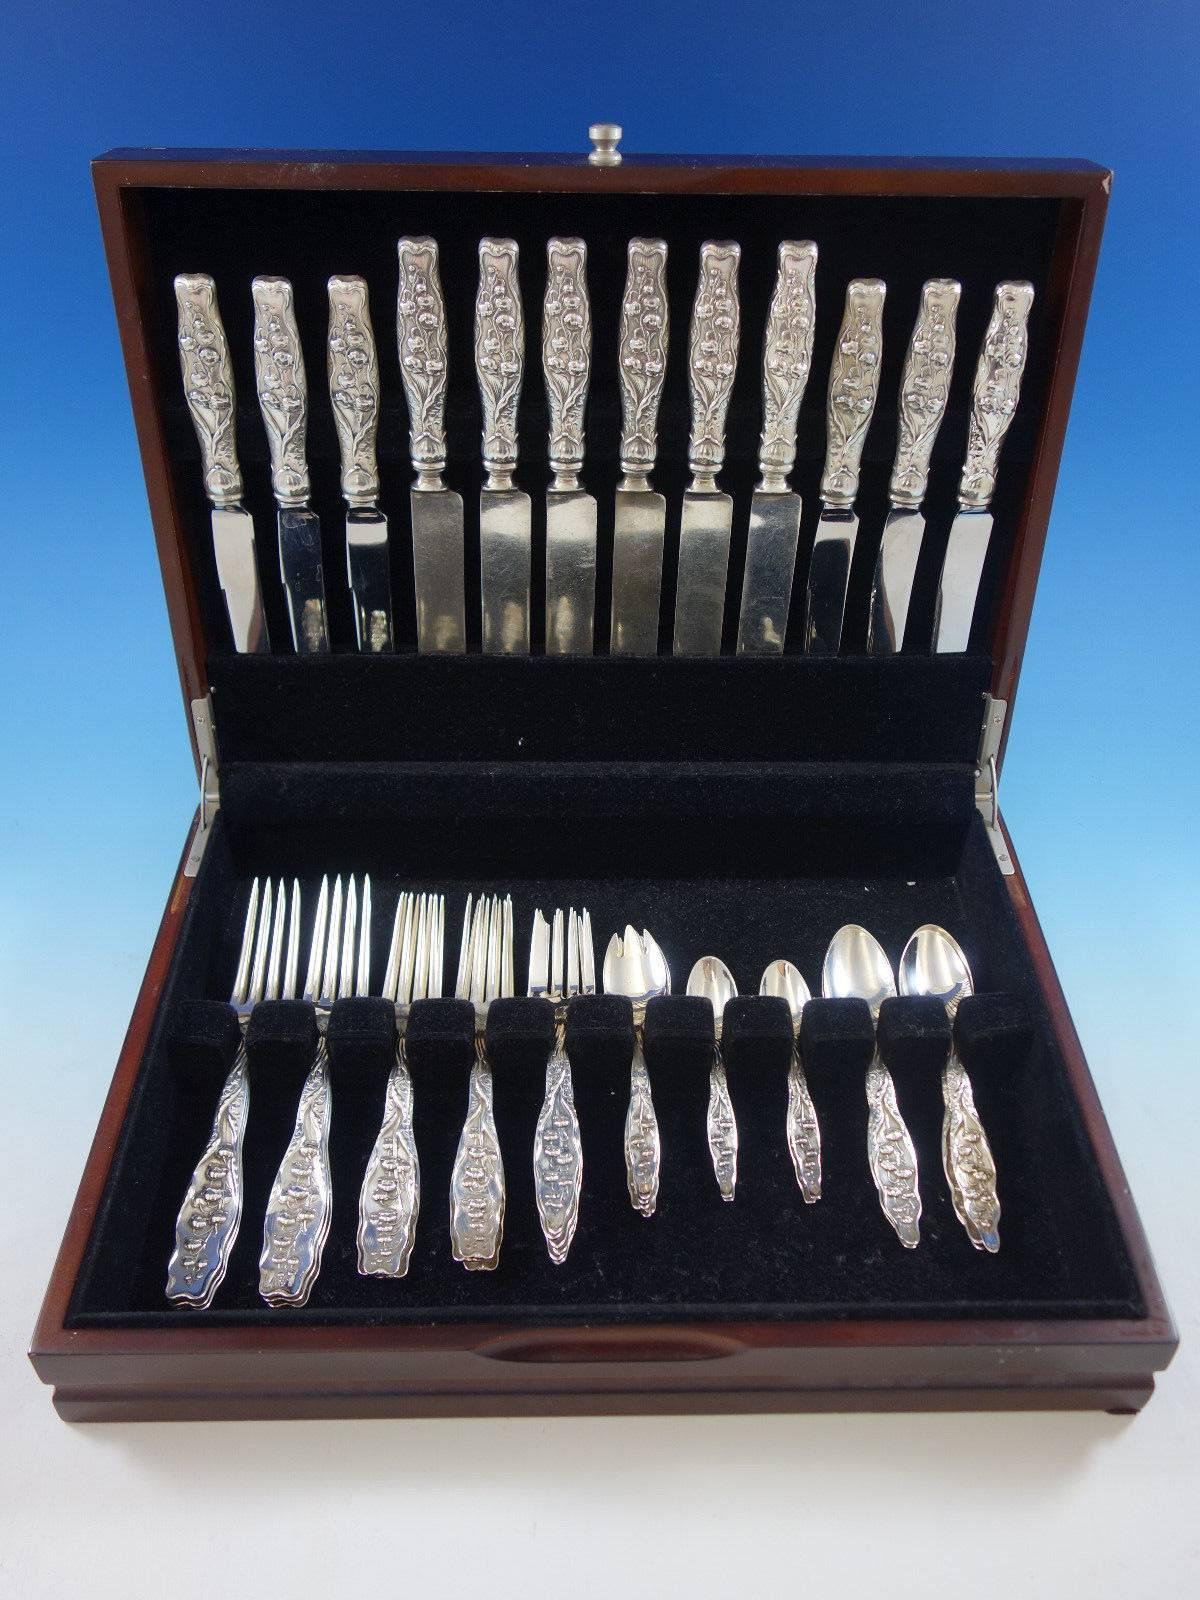 Lily of the valley by Whiting sterling silver flatware set, 48 pieces. This set includes: 

six dinner size knives, 9 1/2